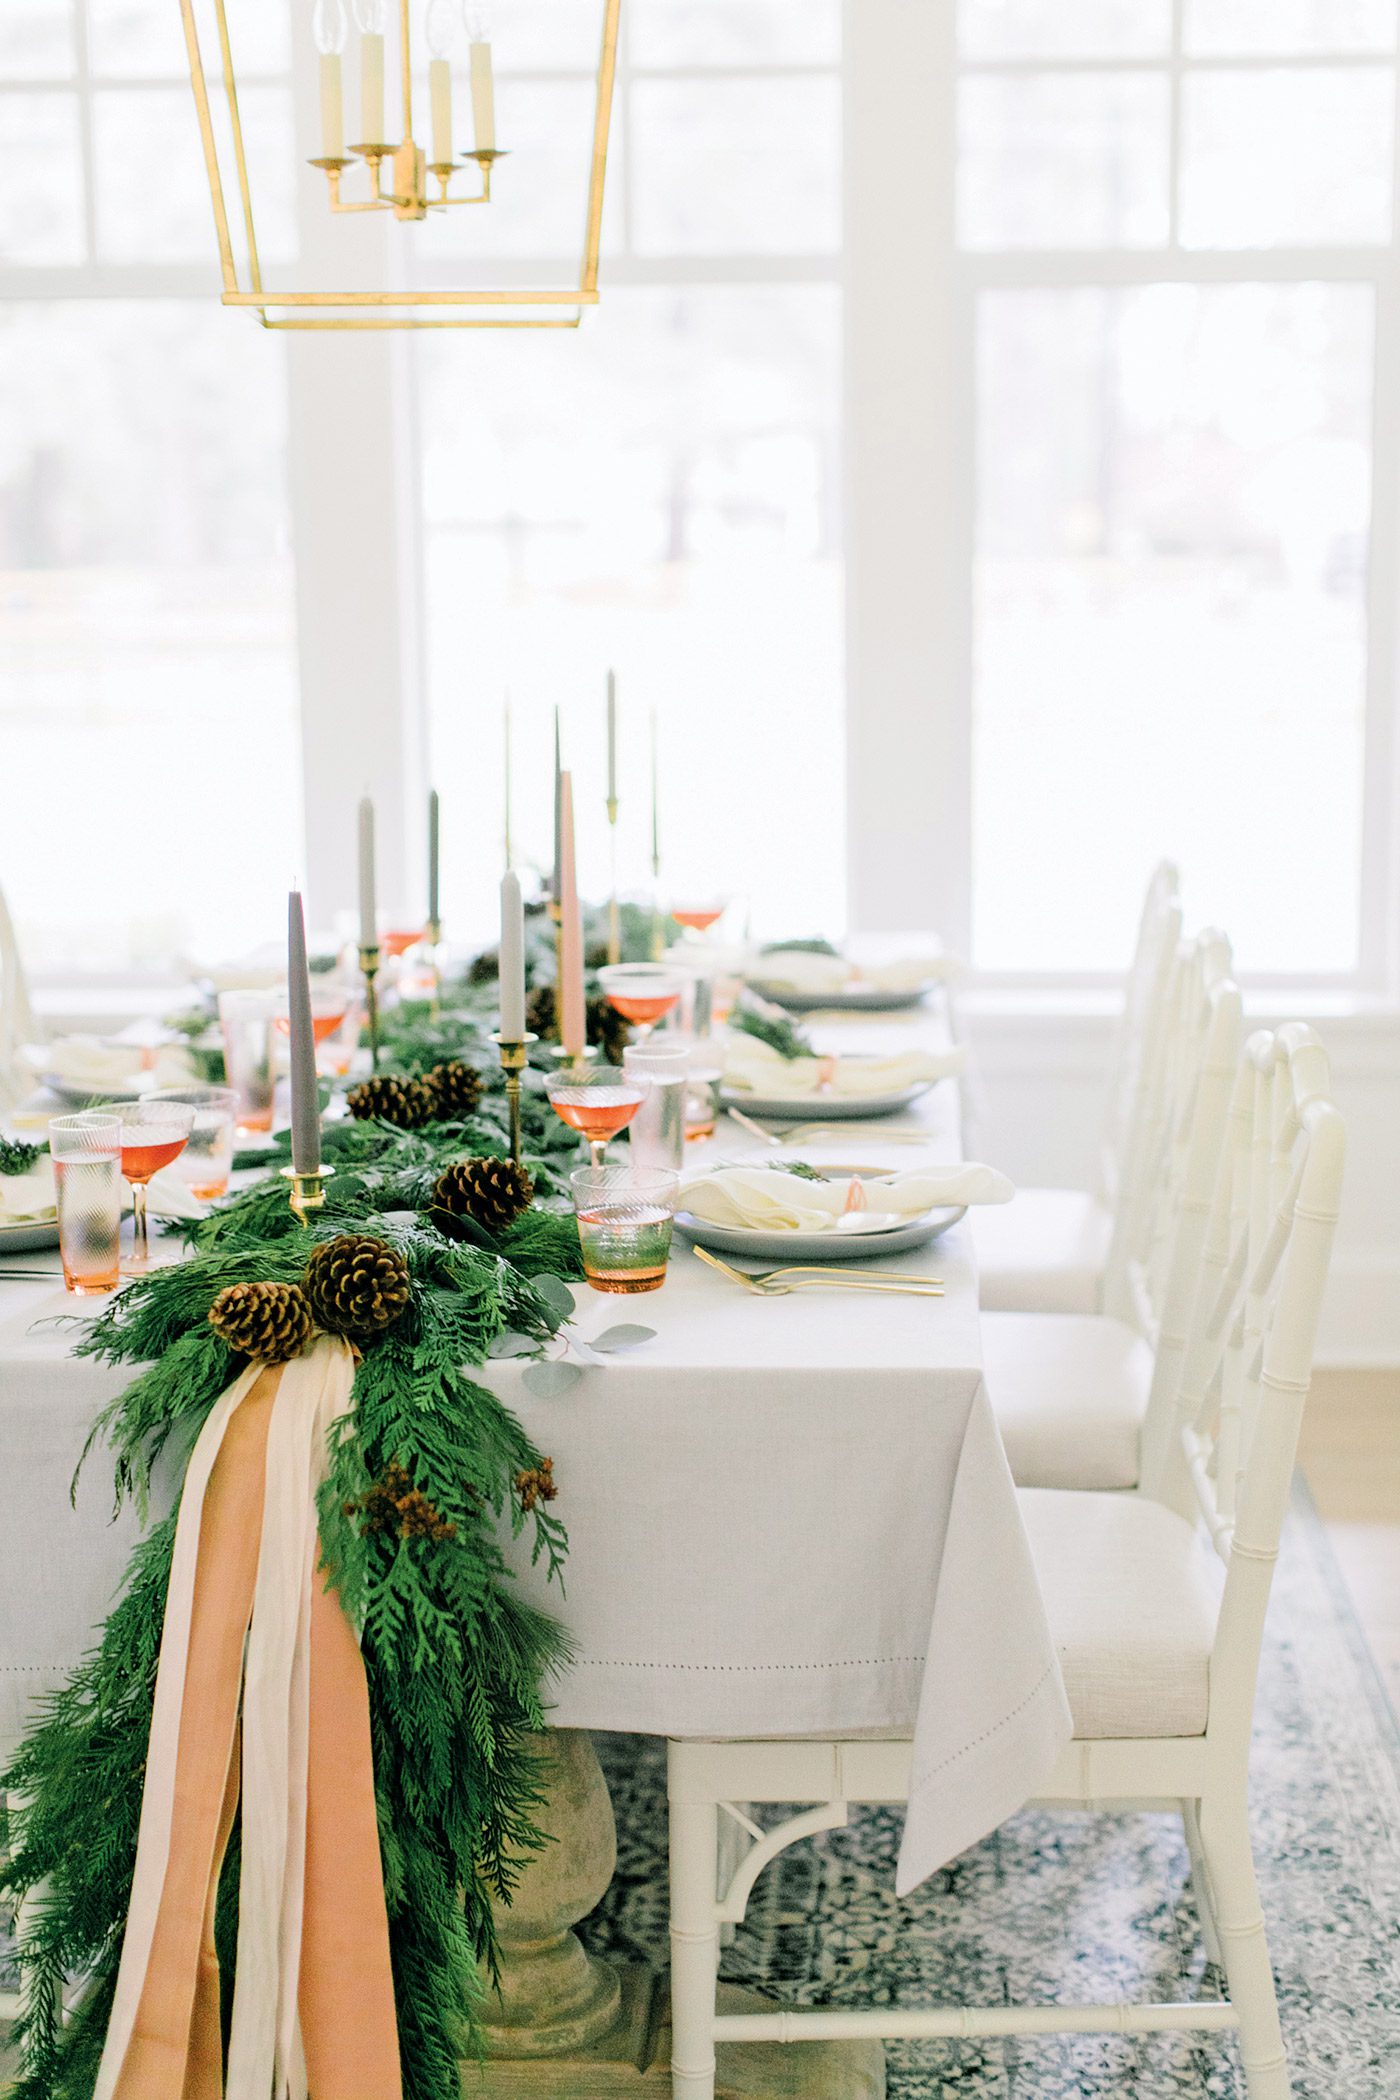 The Christmas dinner table has lots of natural light from the windows and a large evergreen garland running down the middle of it.